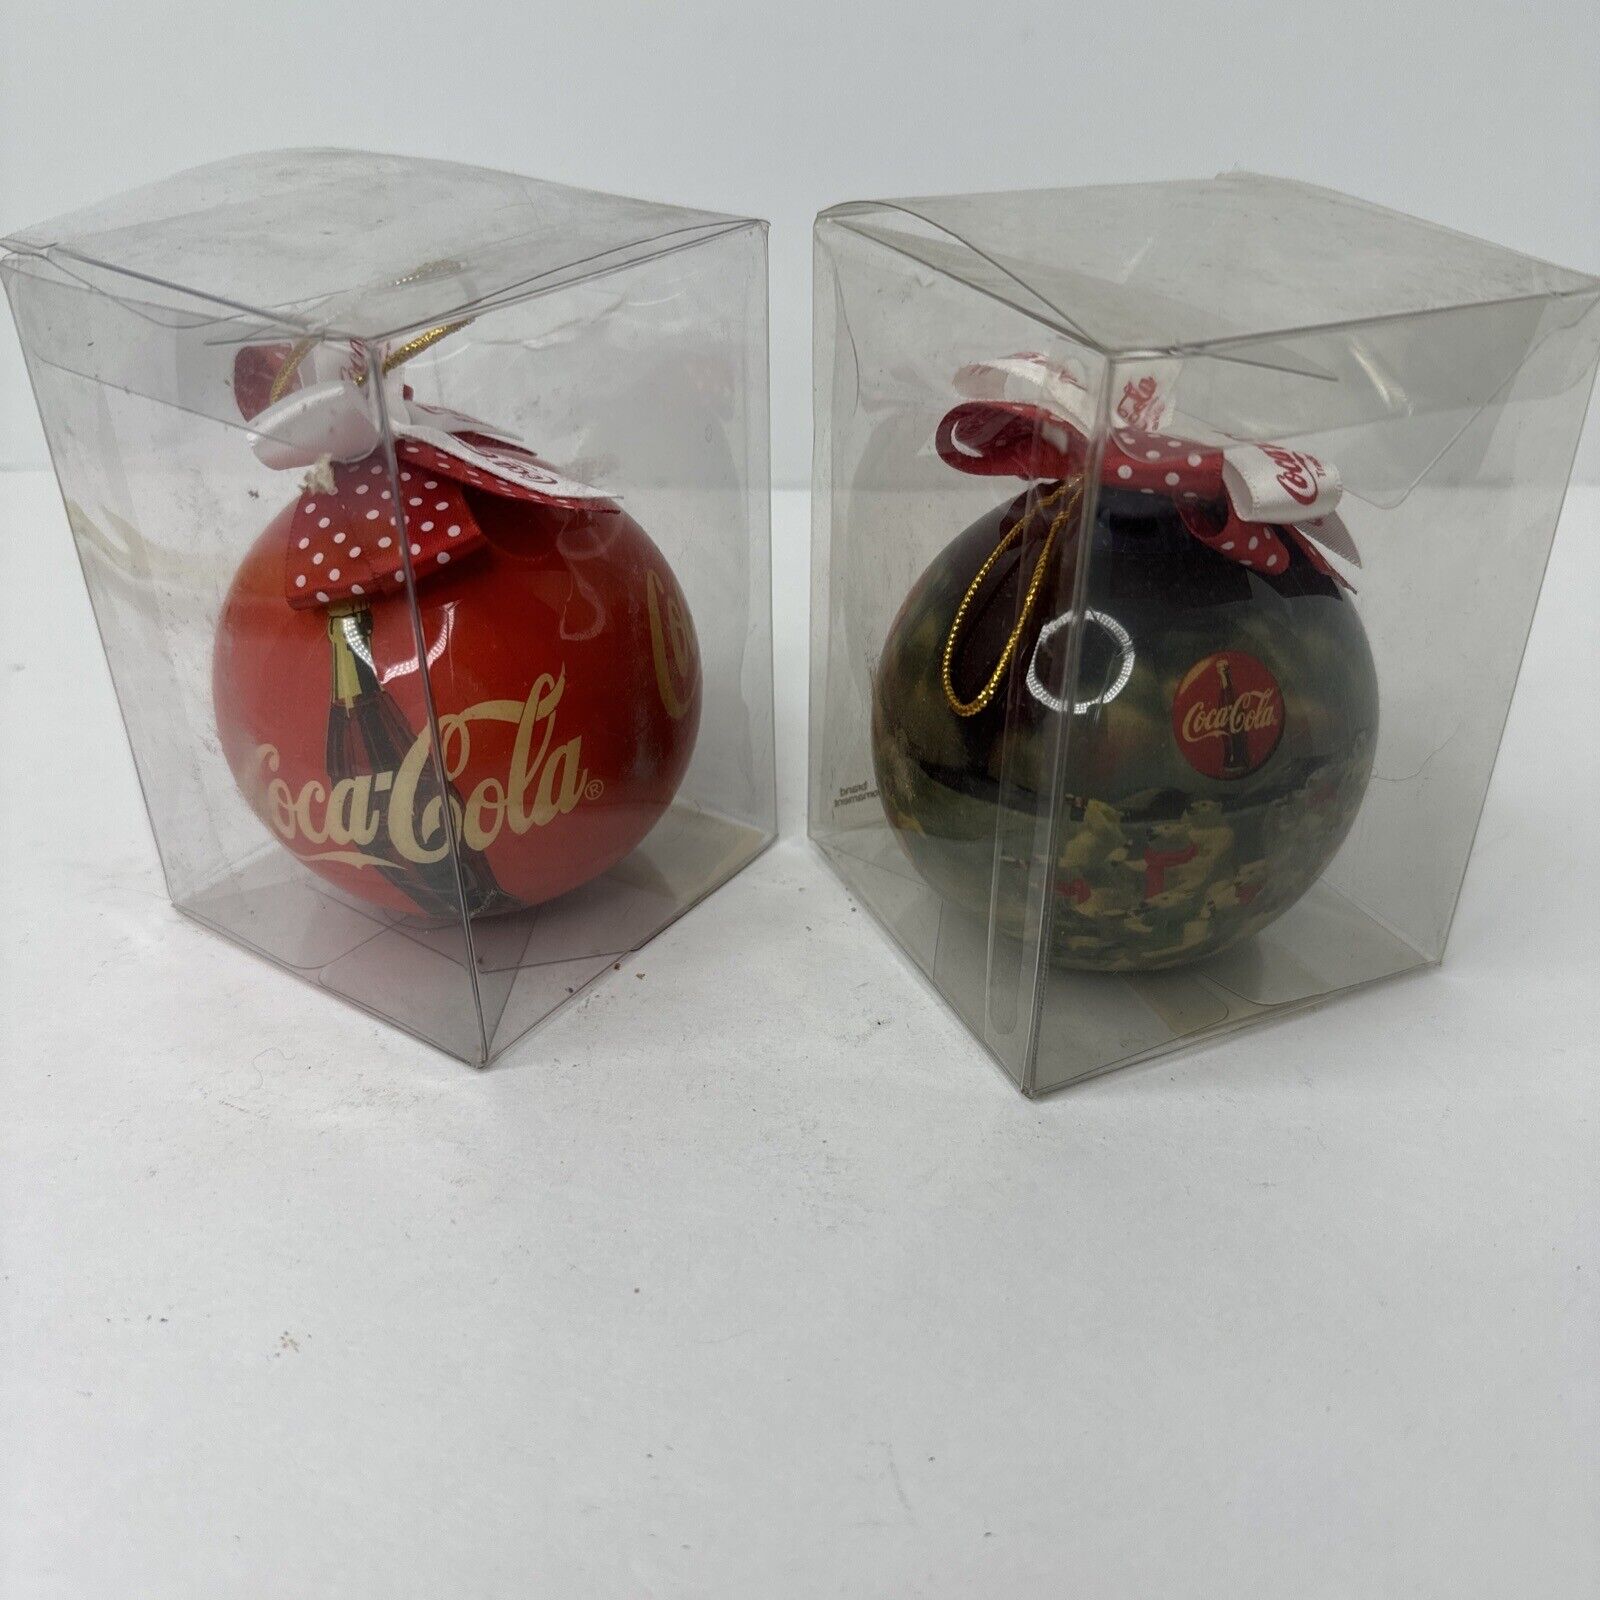 2 Vintage Coca-Cola Bulb Style Christmas Ornaments Great Condition